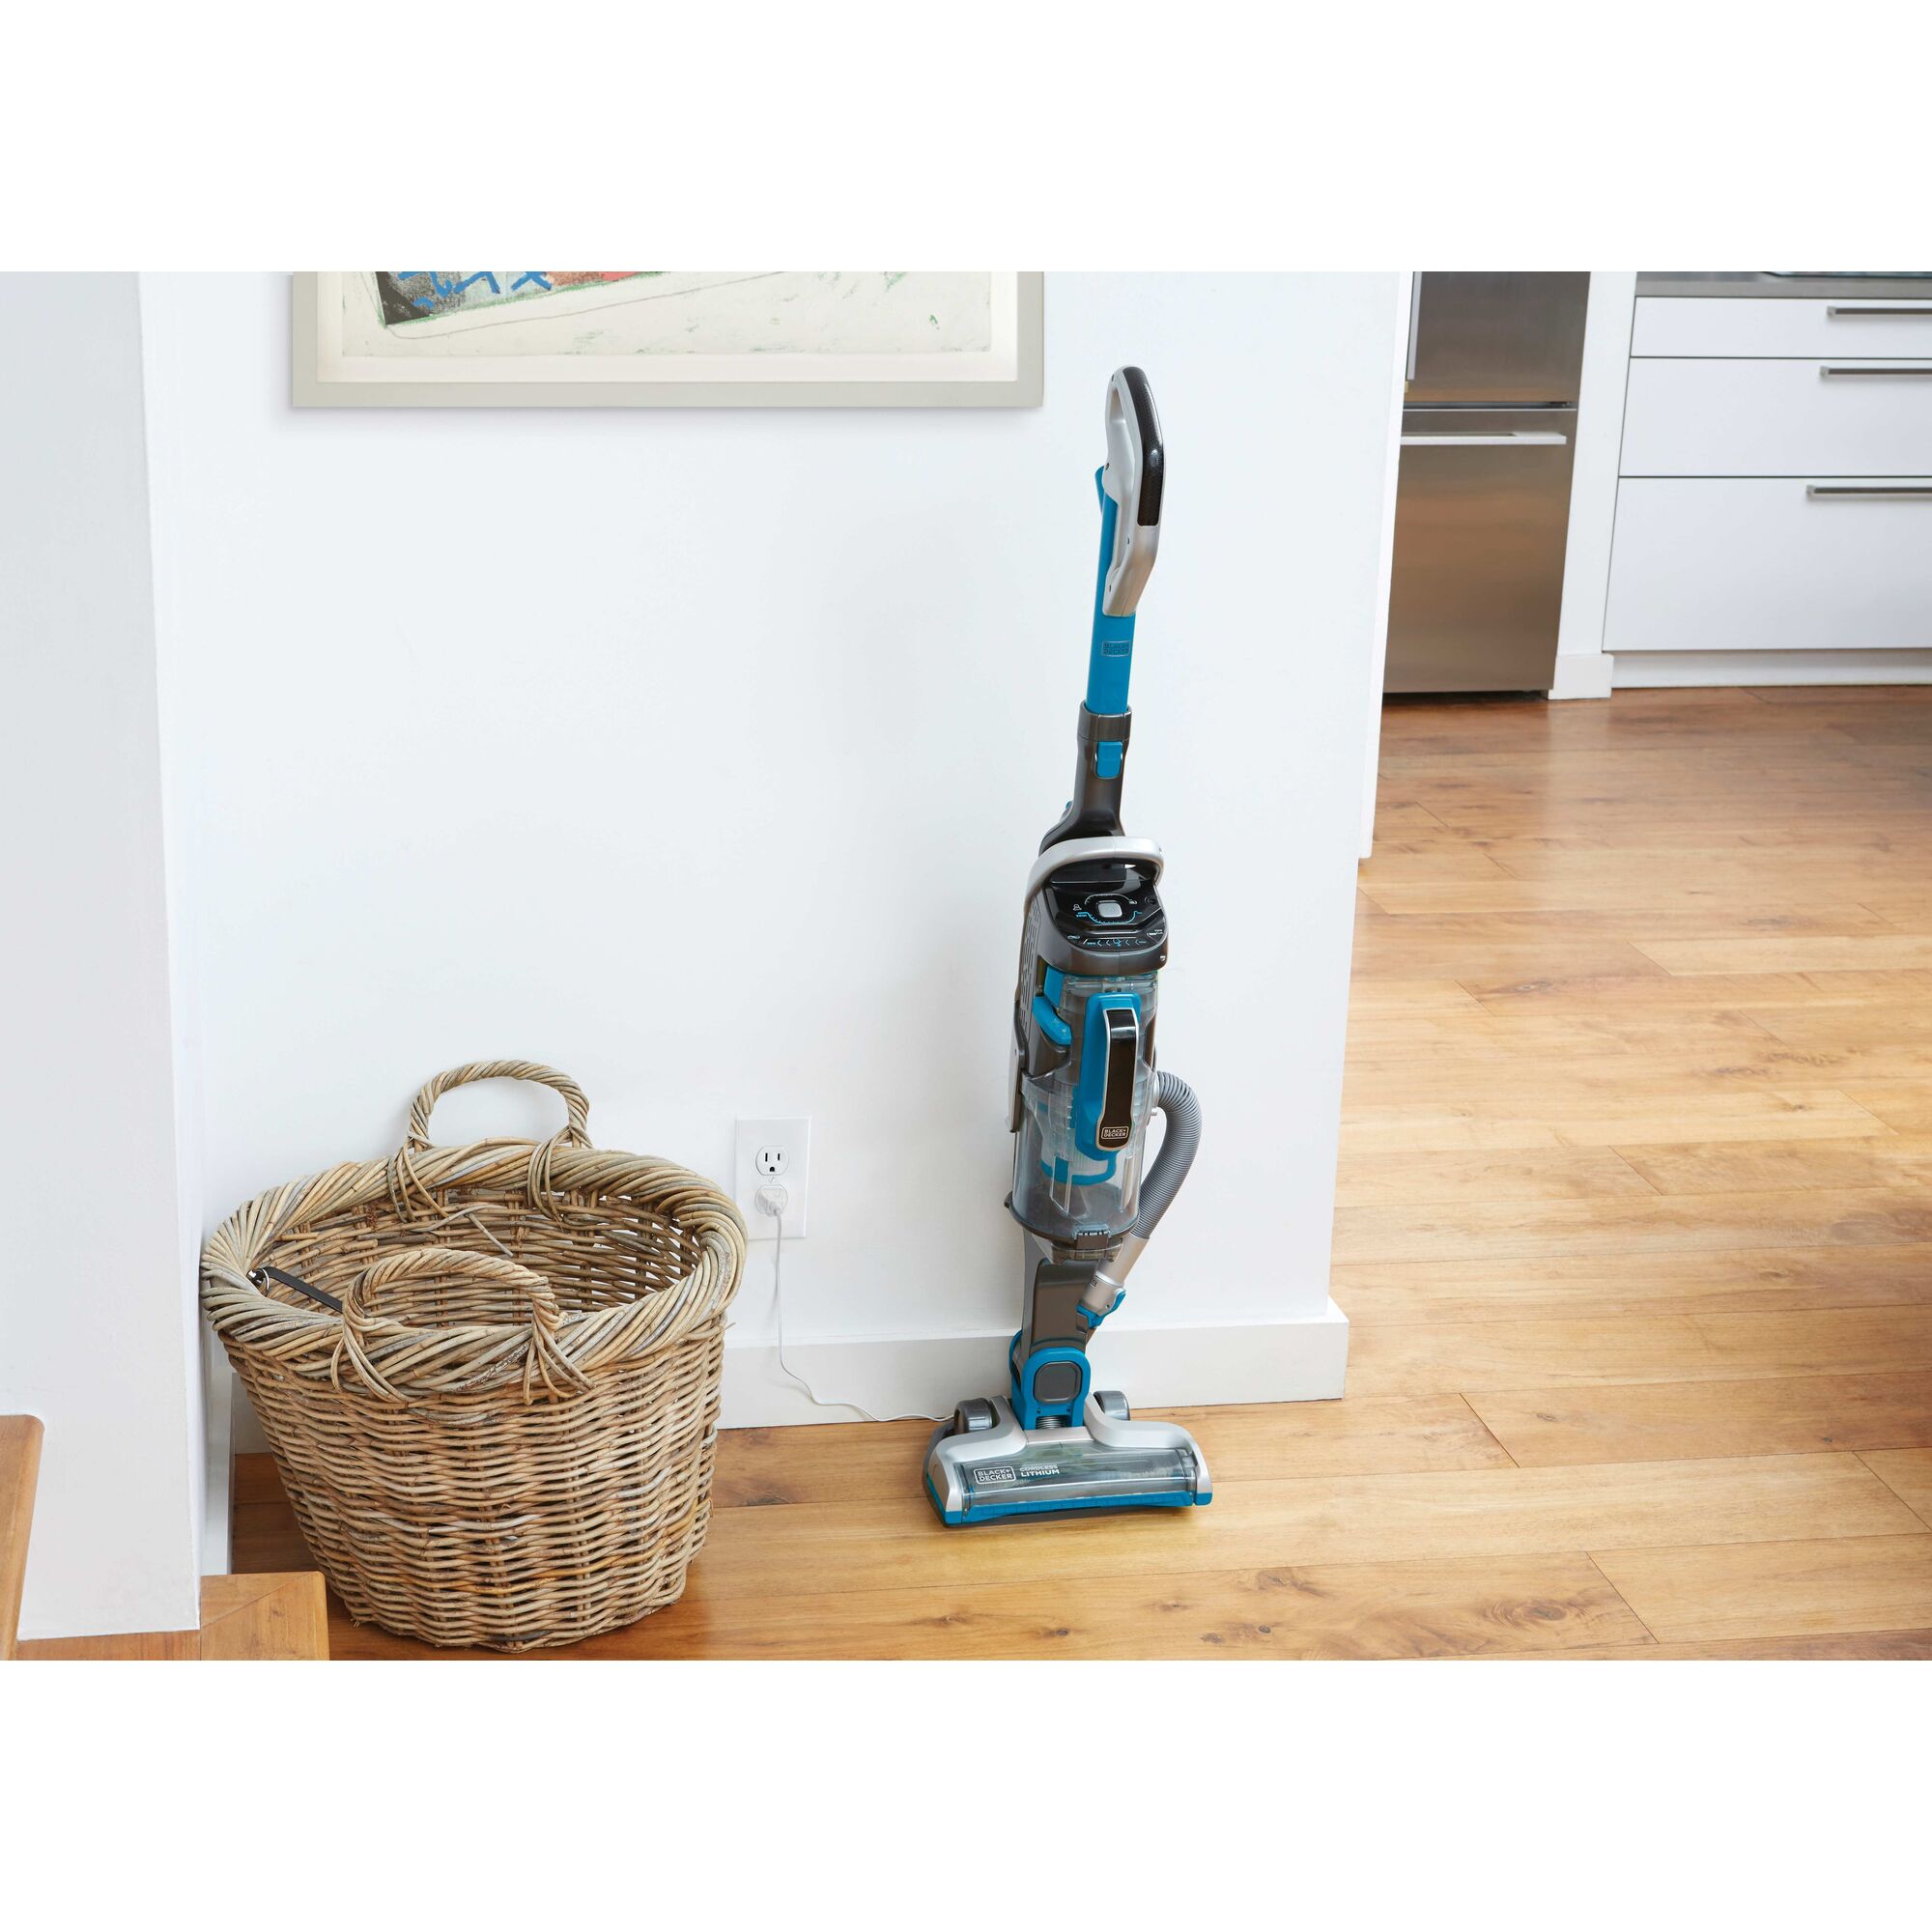 Jack plug charger feature of POWER SERIES PRO cordless 2 in 1 vacuum.